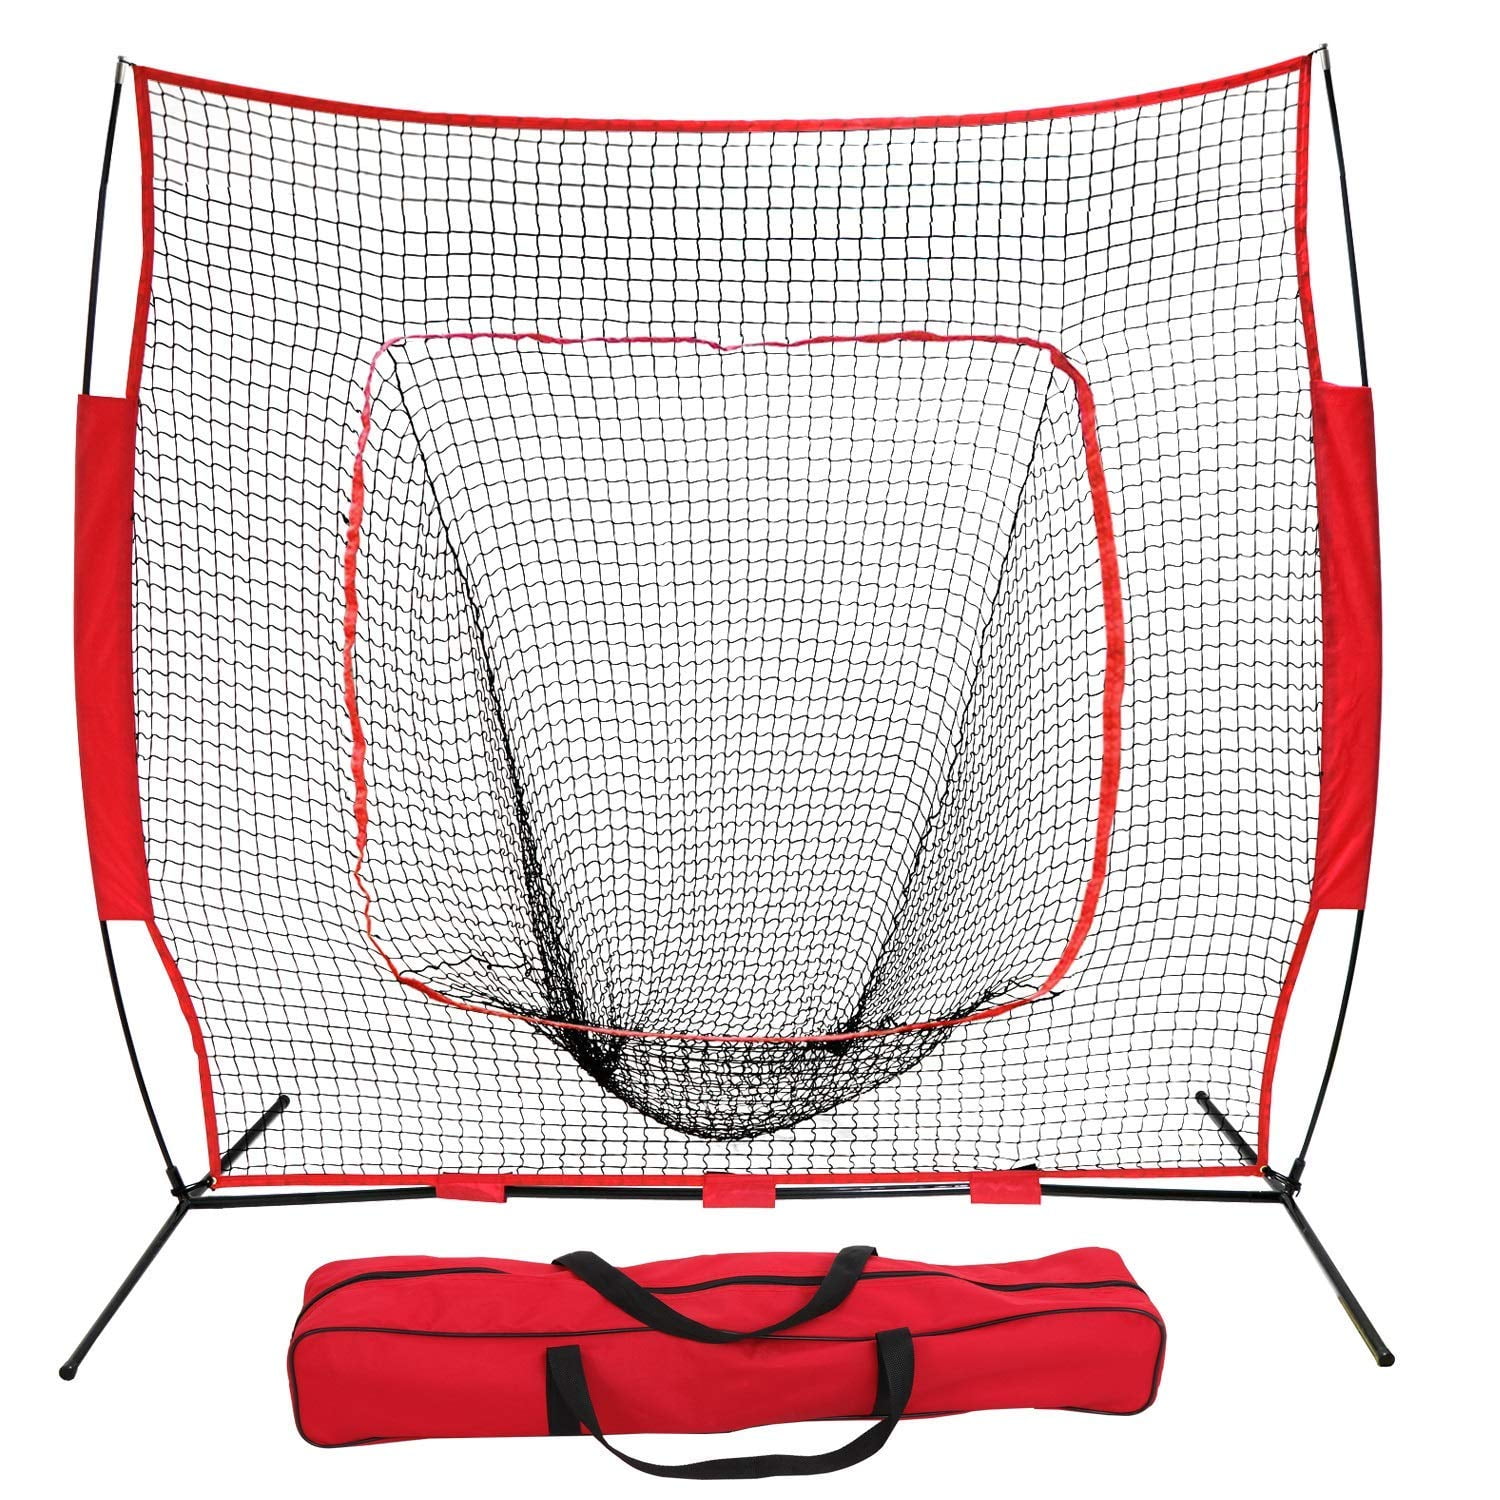 Large Mouth Pitching Bow Frame Training Equipment Bundle Batting Fielding Backstop Portable Training Aid Mostbest Baseball Softball Practice Net 7 ft x 4 ft| Practice Hitting 